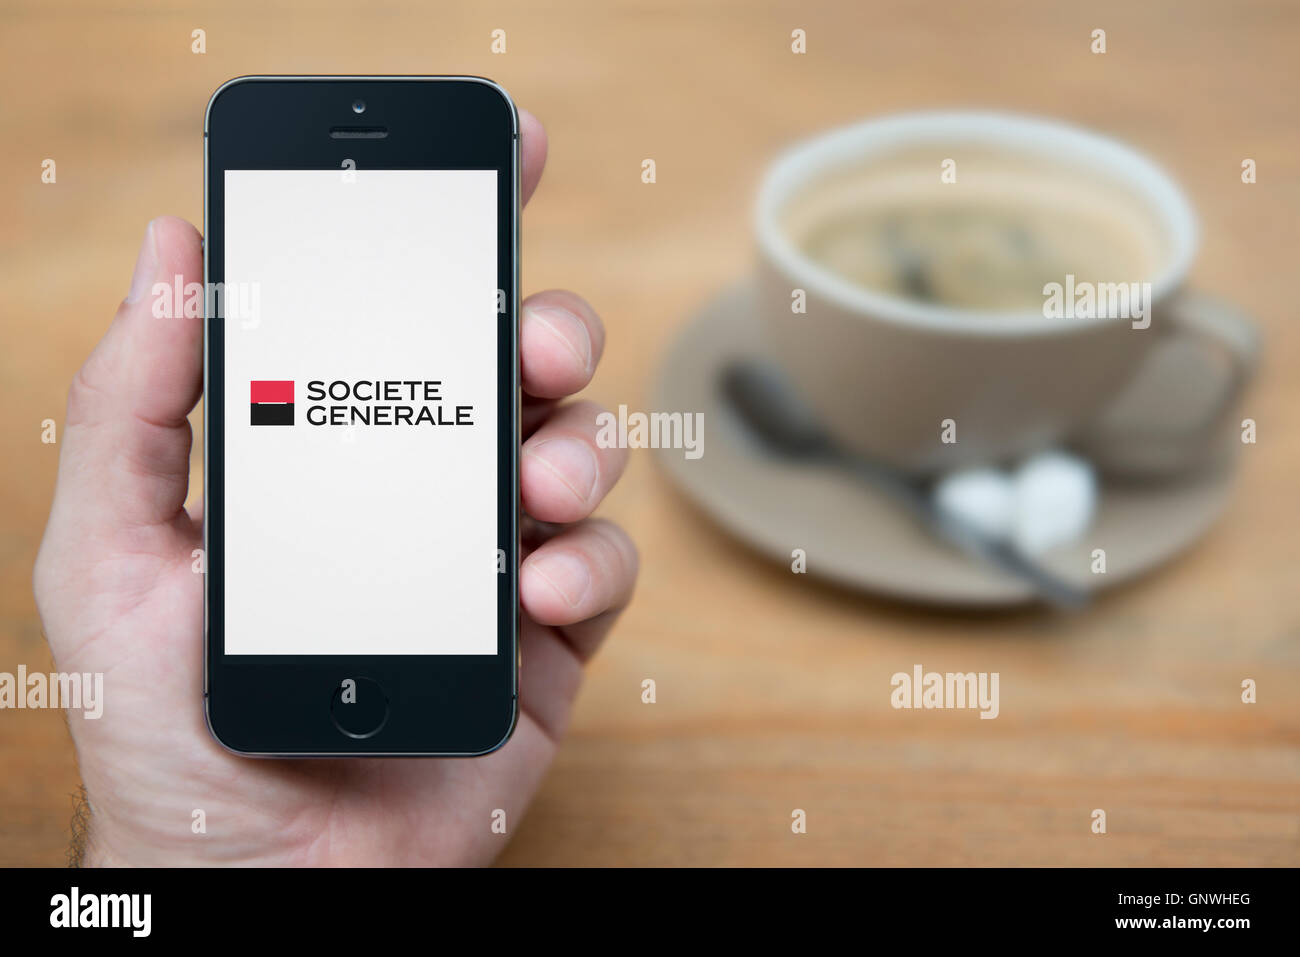 A man looks at his iPhone which displays the Societe Generale bank logo, while sat with a cup of coffee (Editorial use only). Stock Photo